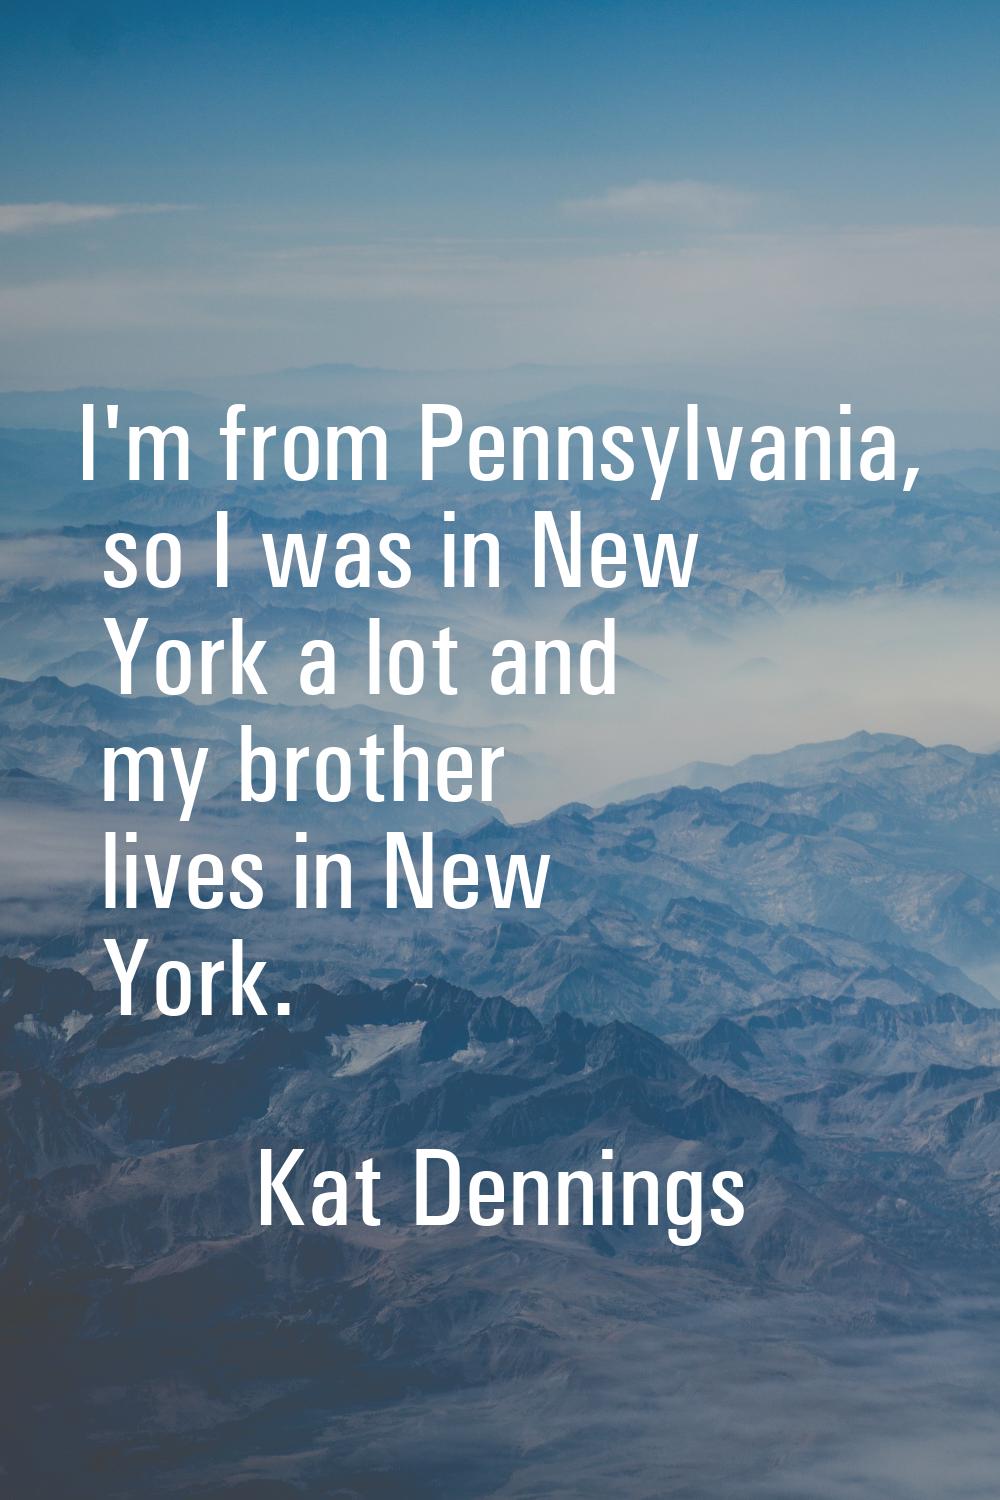 I'm from Pennsylvania, so I was in New York a lot and my brother lives in New York.